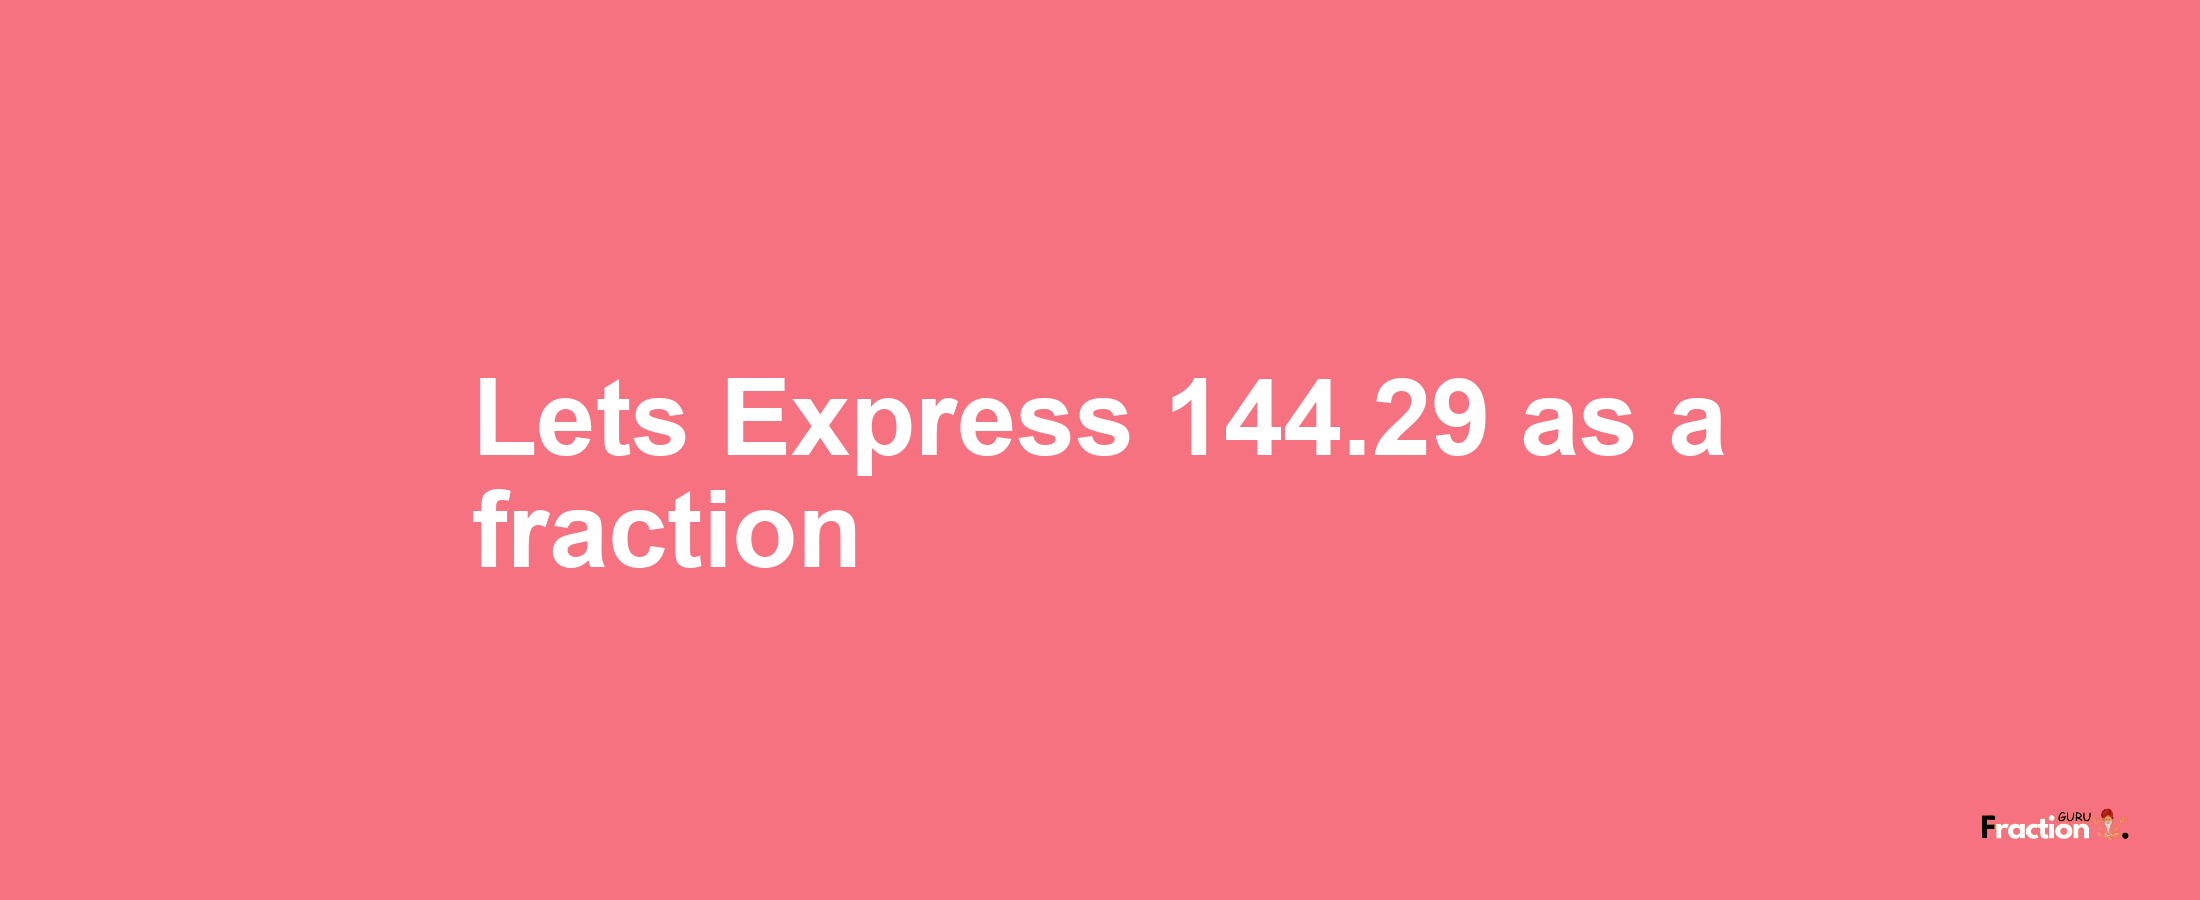 Lets Express 144.29 as afraction